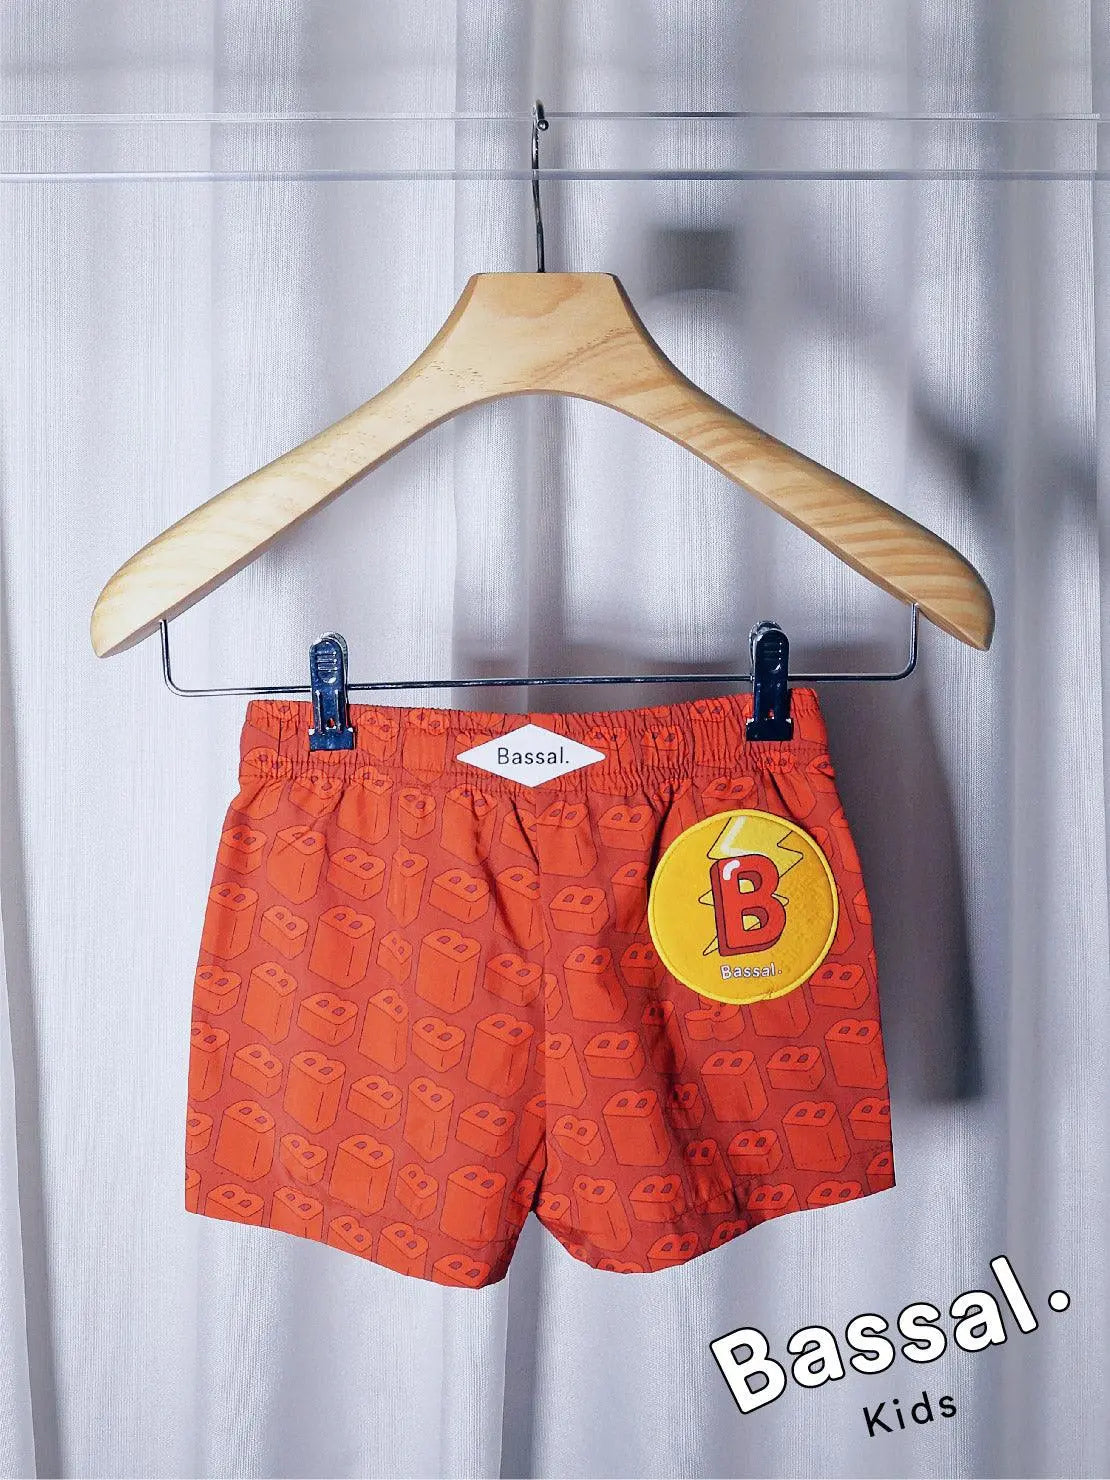 Bright orange children's swim shorts with a happy cartoon face pattern hang on a wooden hanger labeled "Bassal." The shorts, known as B's Red Kids Swimwear, feature a yellow drawstring and metallic clips, with the brand name "Bassal" displayed in the bottom right corner. Available at bassalstore in Barcelona.